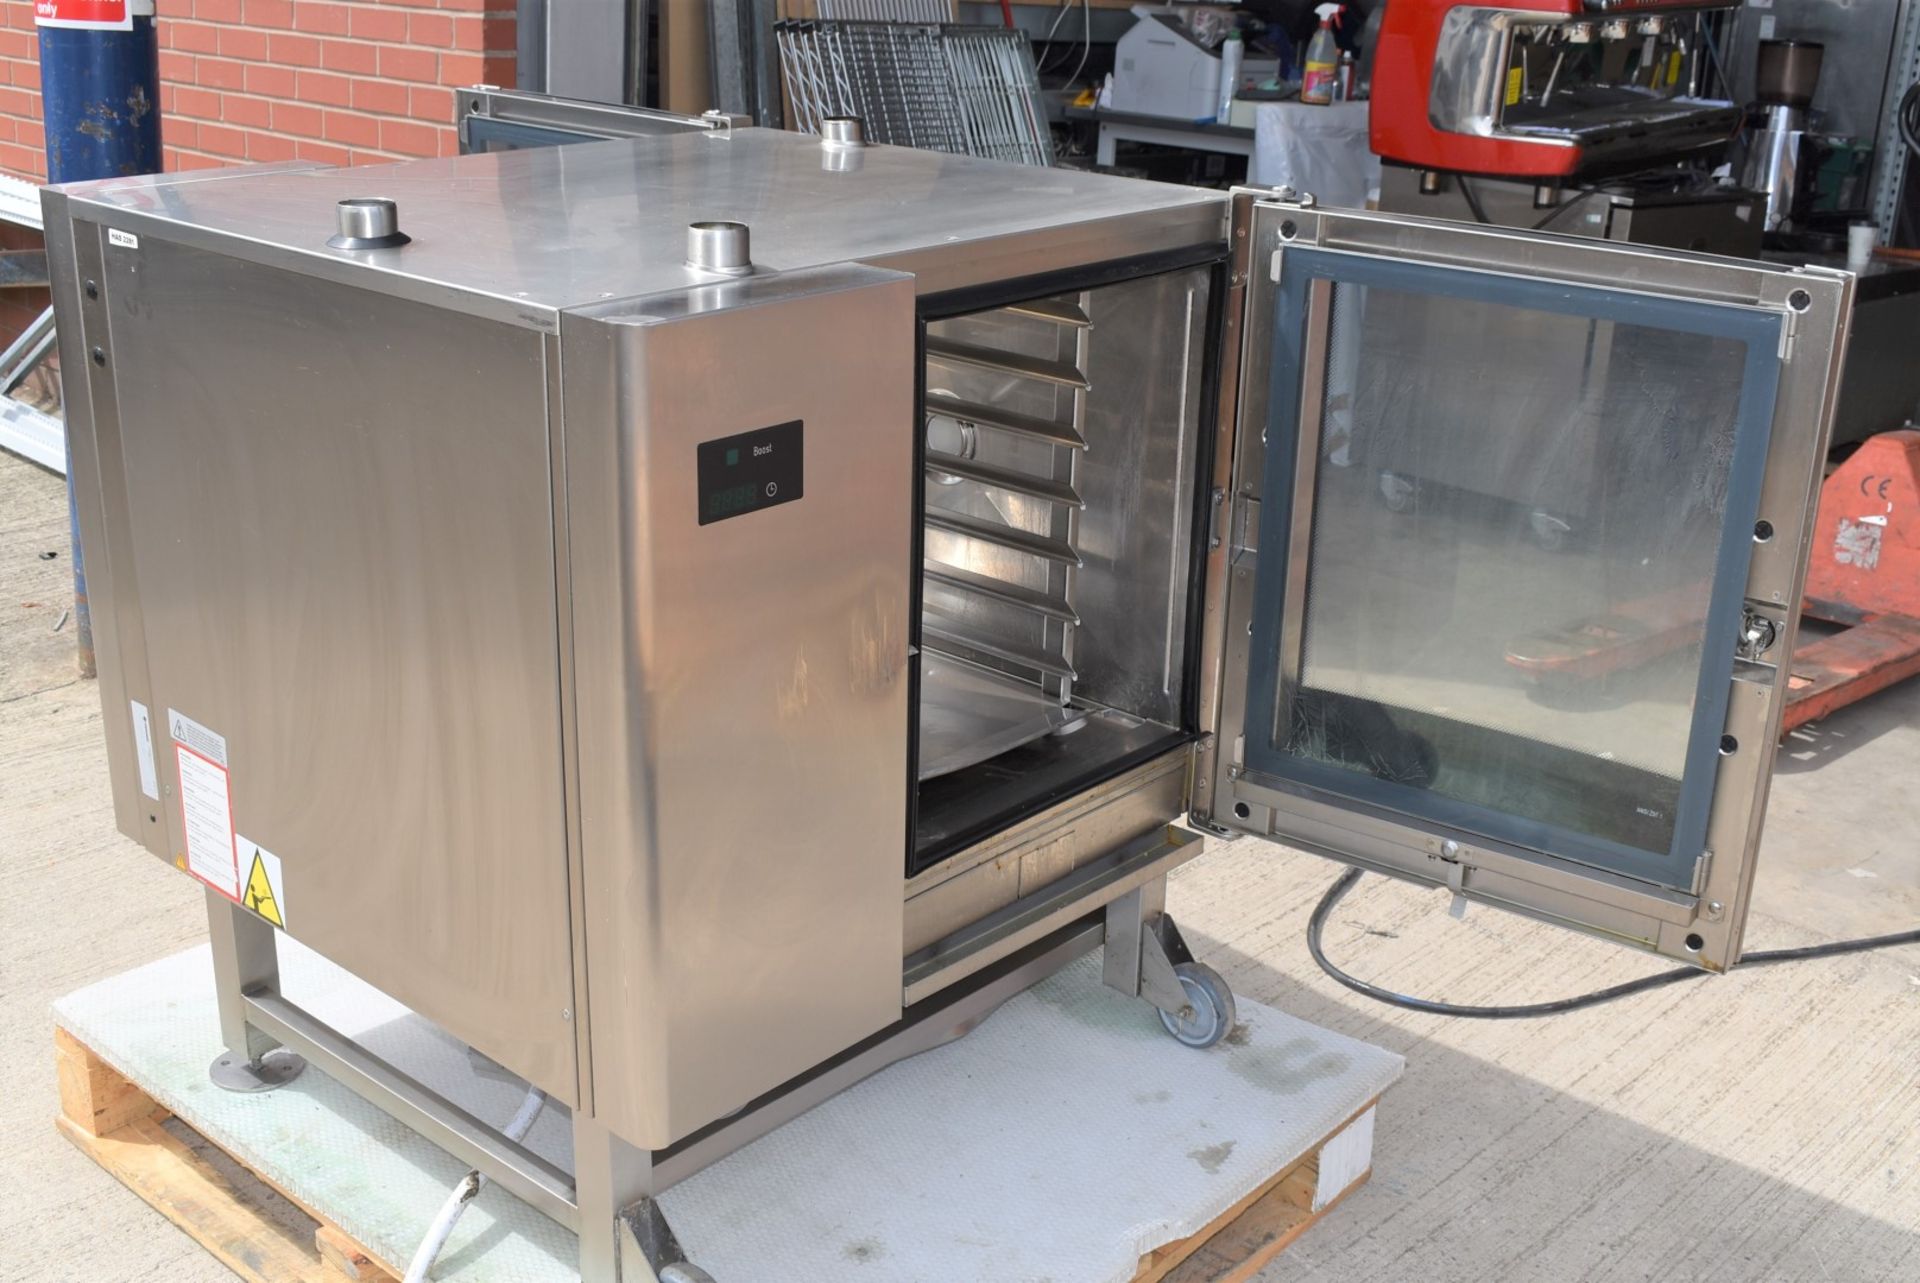 1 x Houno 6 Grid Electric Passthrough Door Combi Oven - 3 Phase With Pre-Set Cooking Options - Image 12 of 17